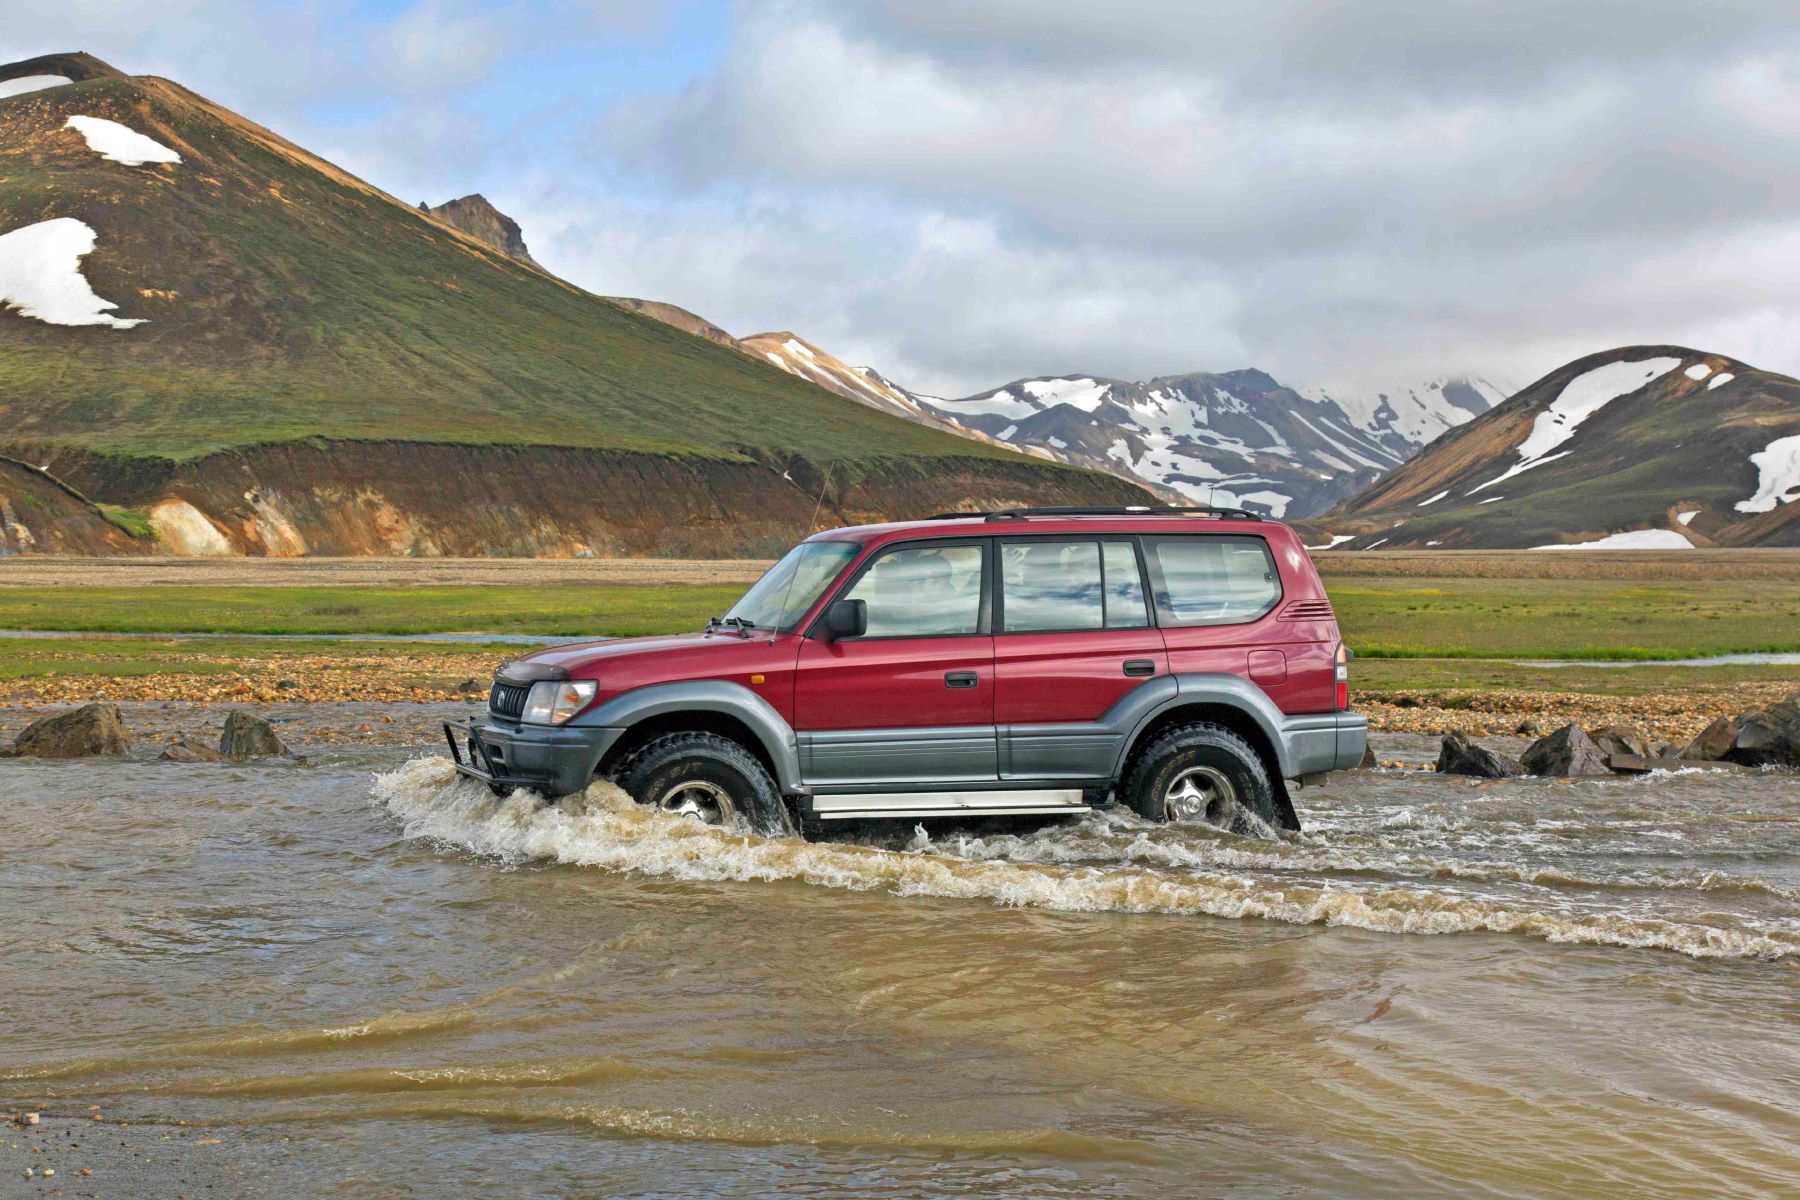 Is the Toyota Land Cruiser Colorado model pictured crossing a river in the Landmannalaugar Valley one of the best Land Cruiser years?